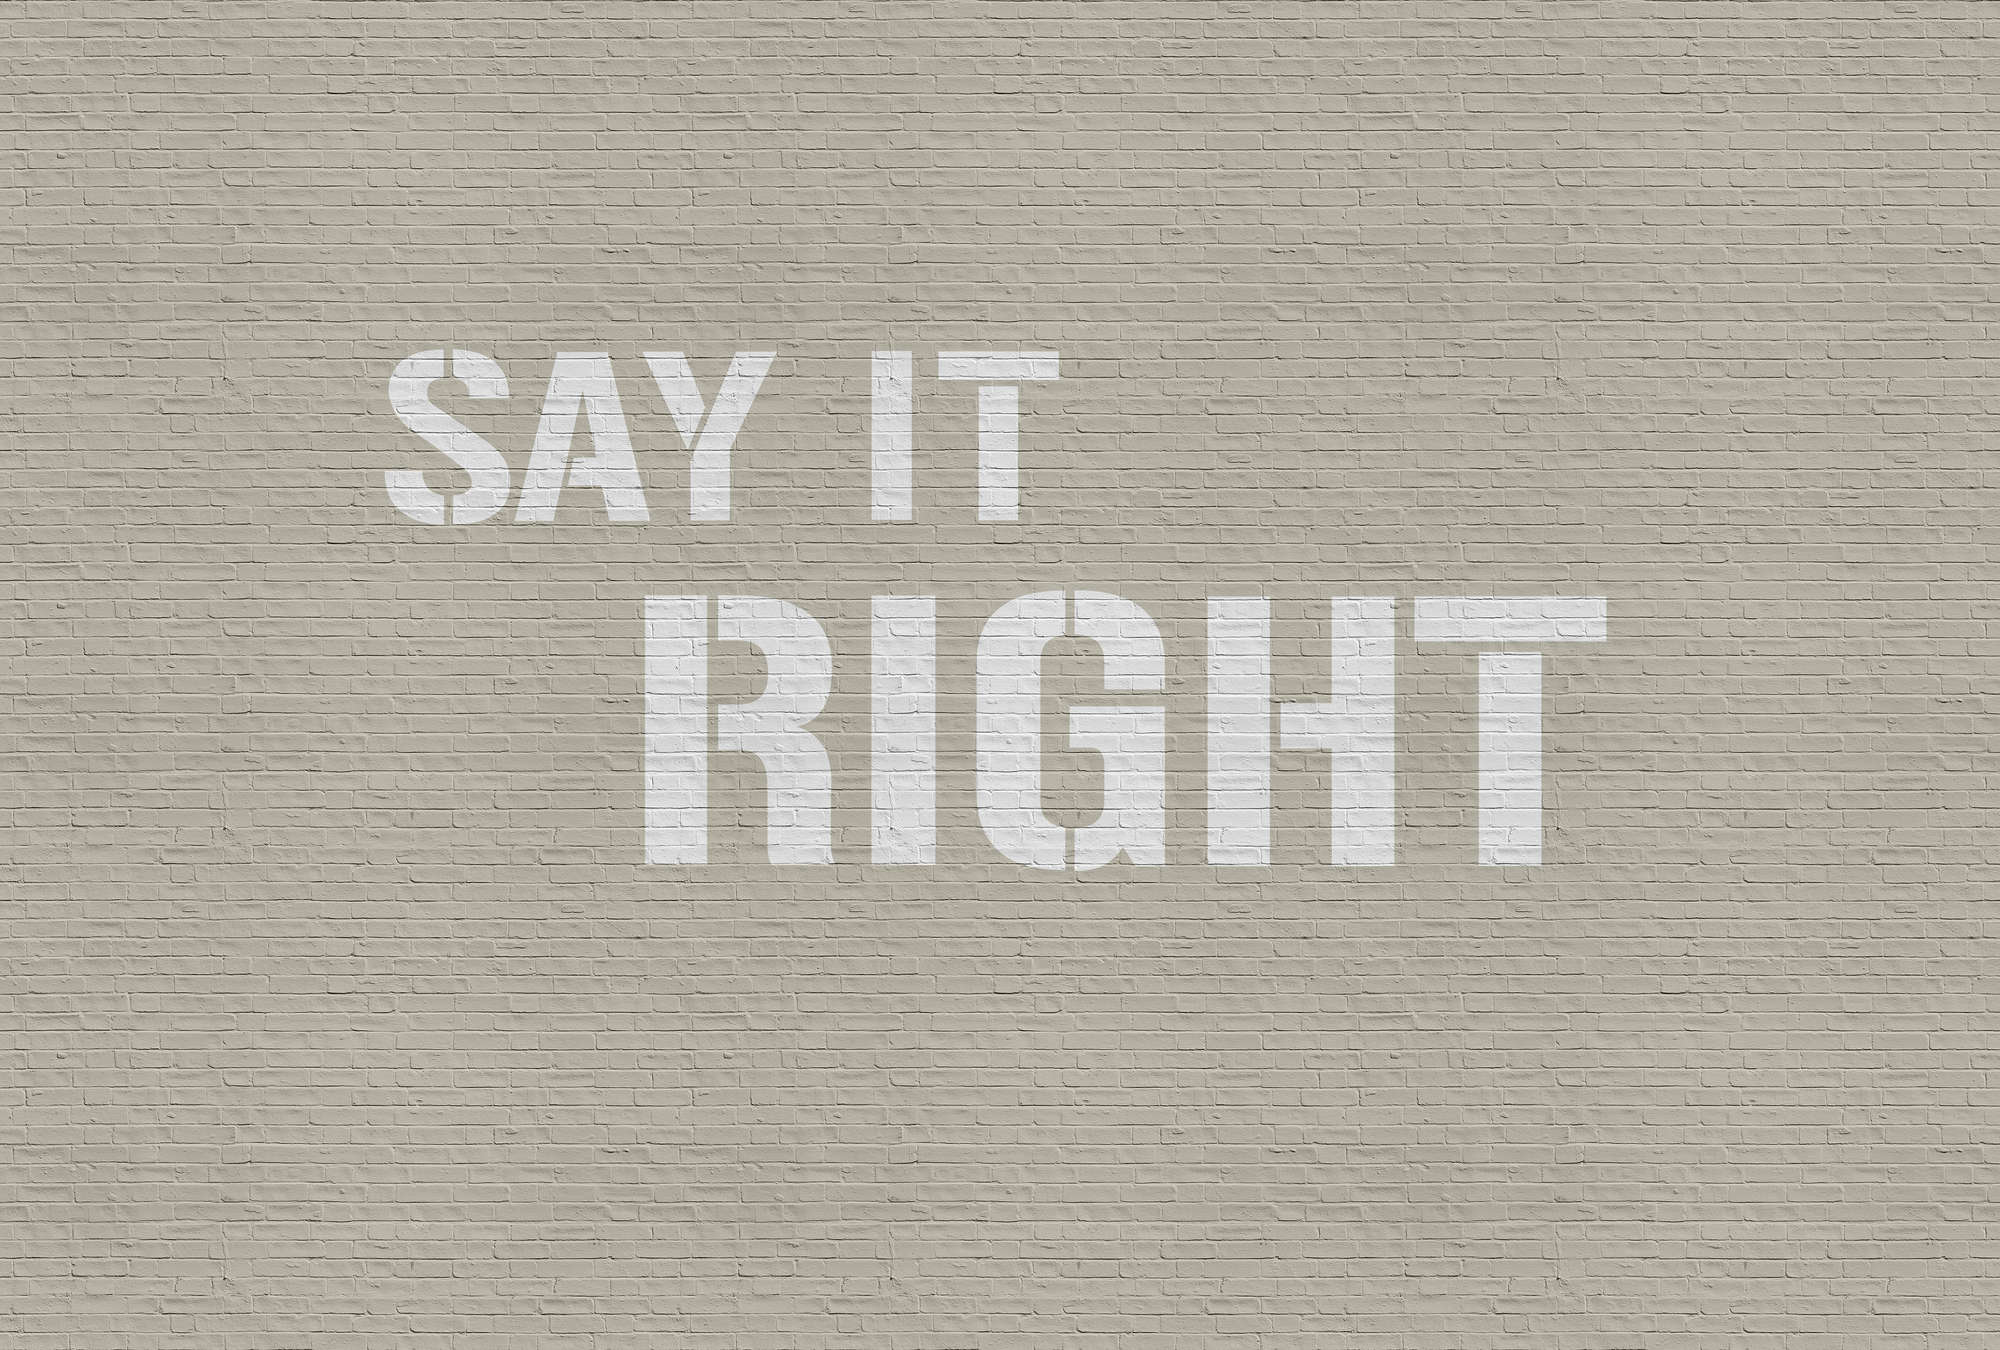             Message 2 - Beige clinker wall with saying as photo wallpaper - cream, grey | pearl smooth fleece
        